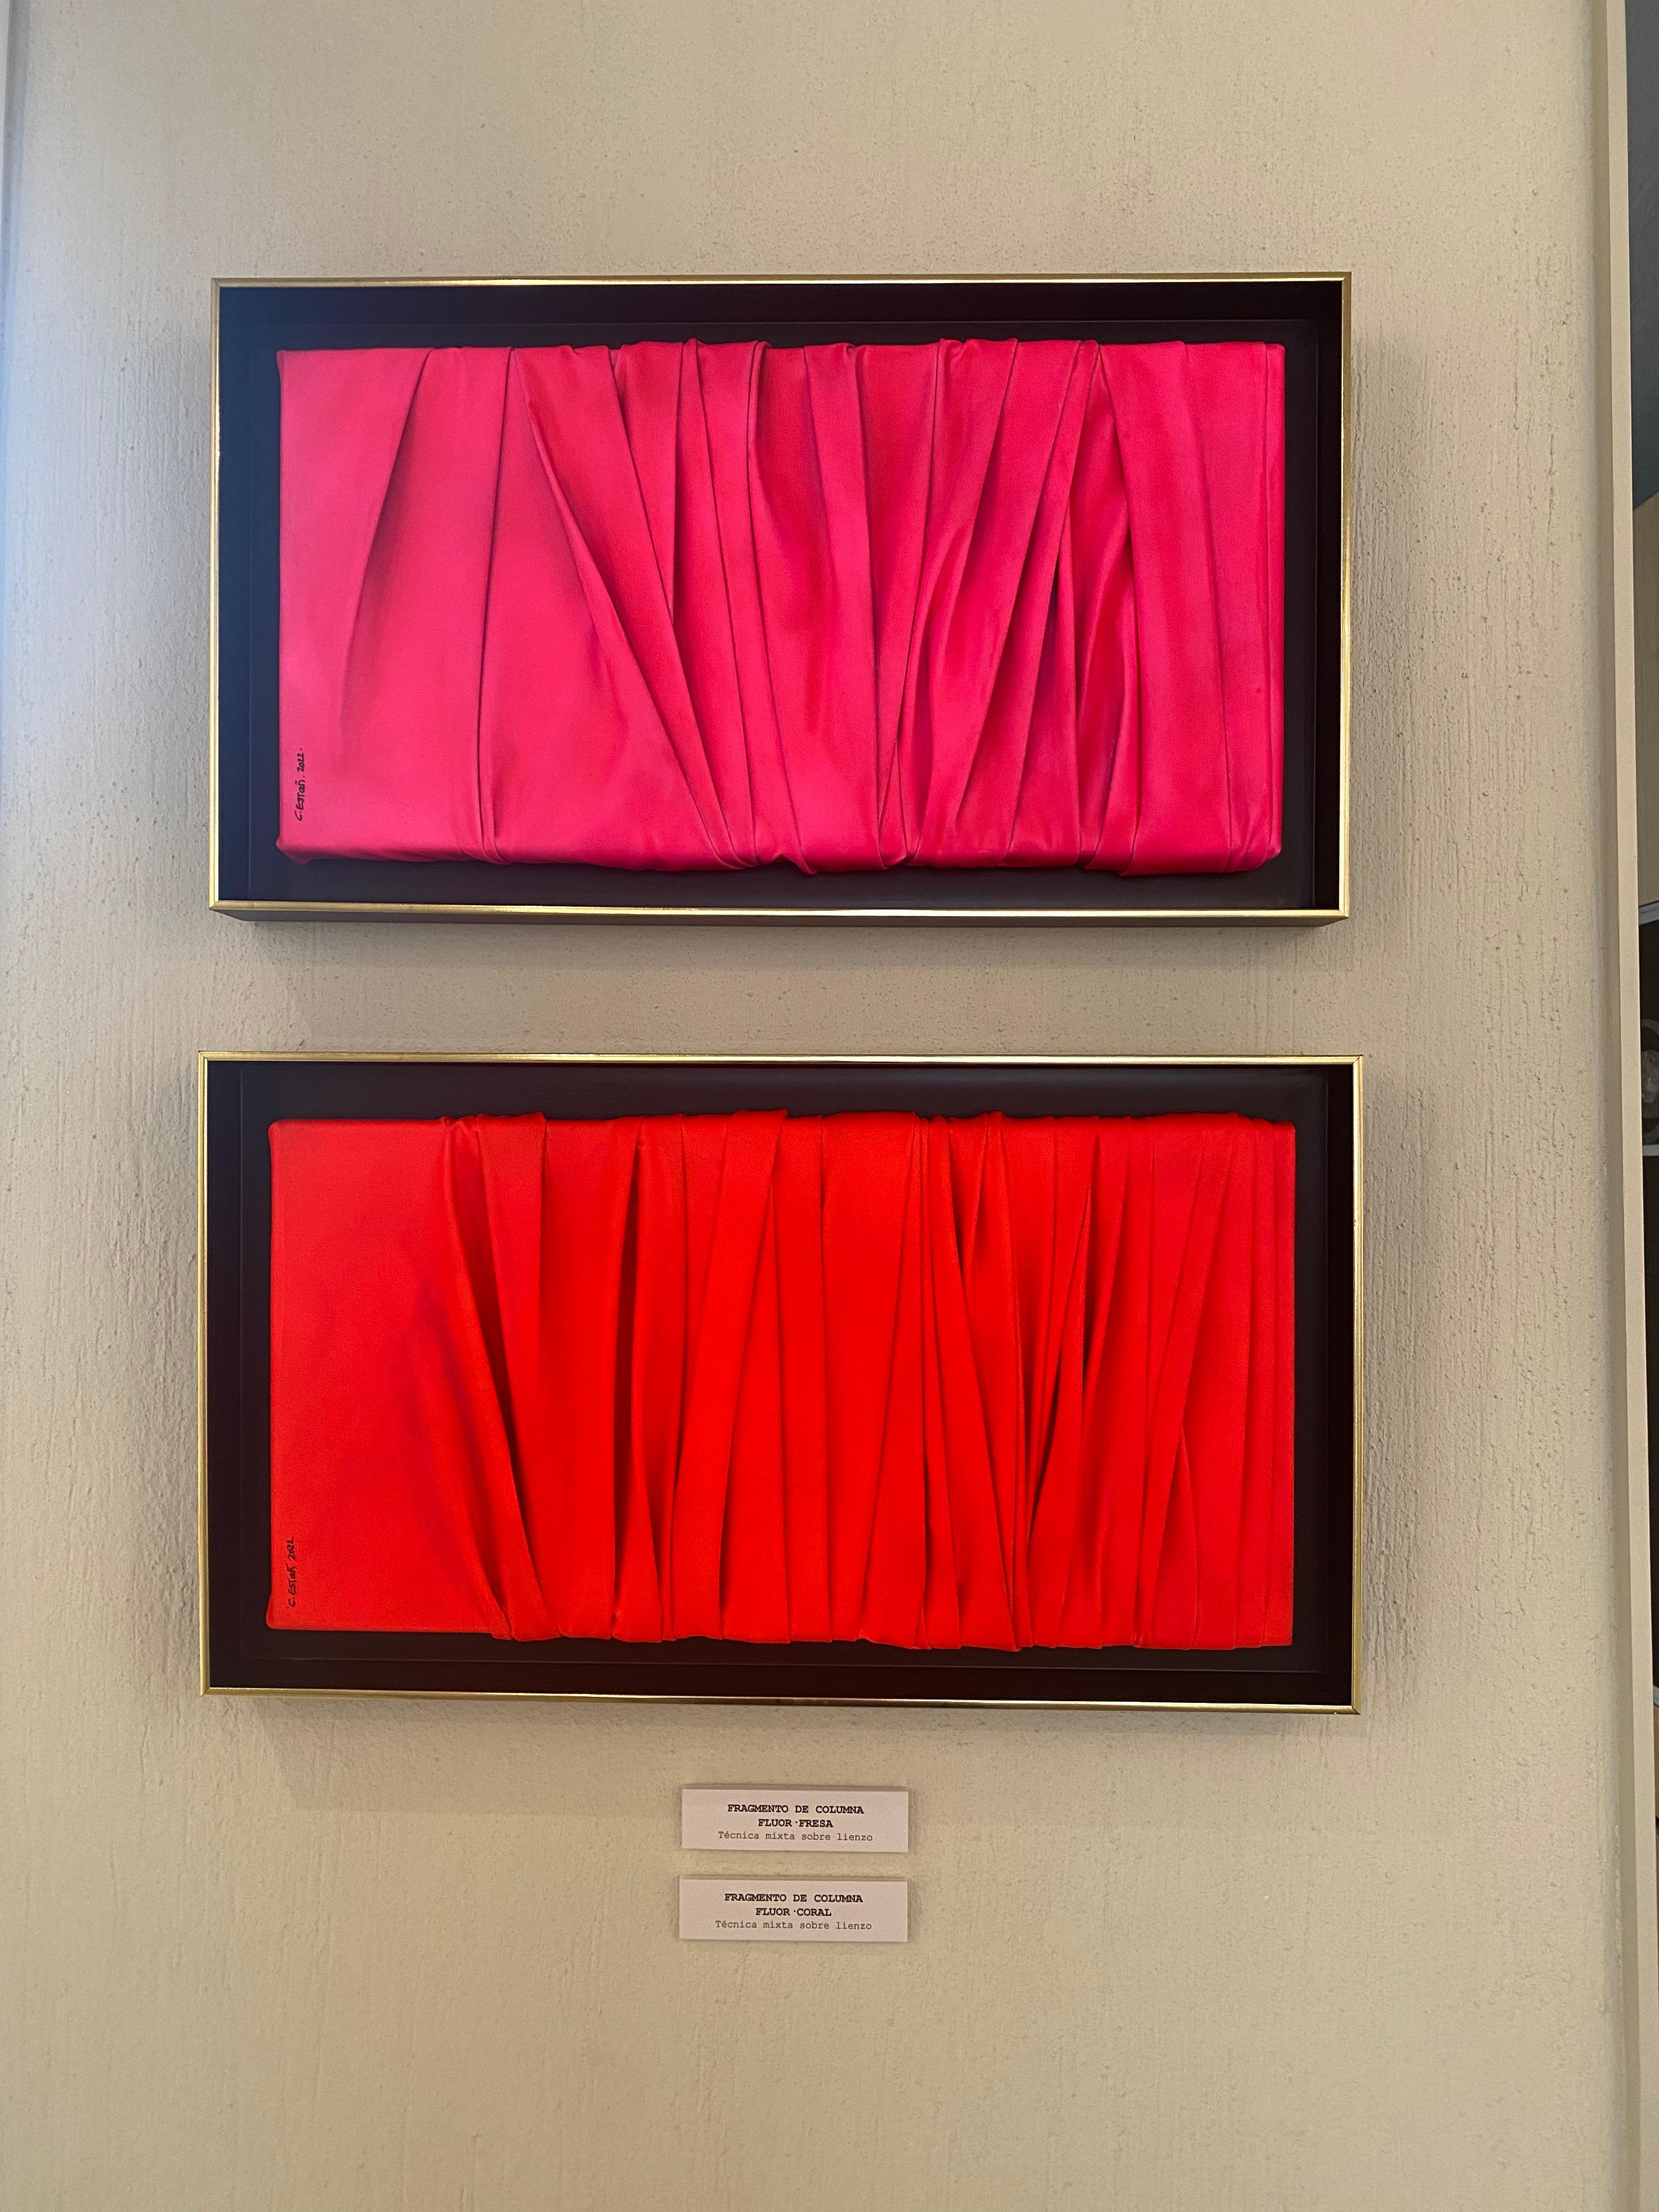 Cristina Estañ Abstract Painting - Diptych Contemporary Collage, Neon Orange & Pink Color on Black. Framed in Gold